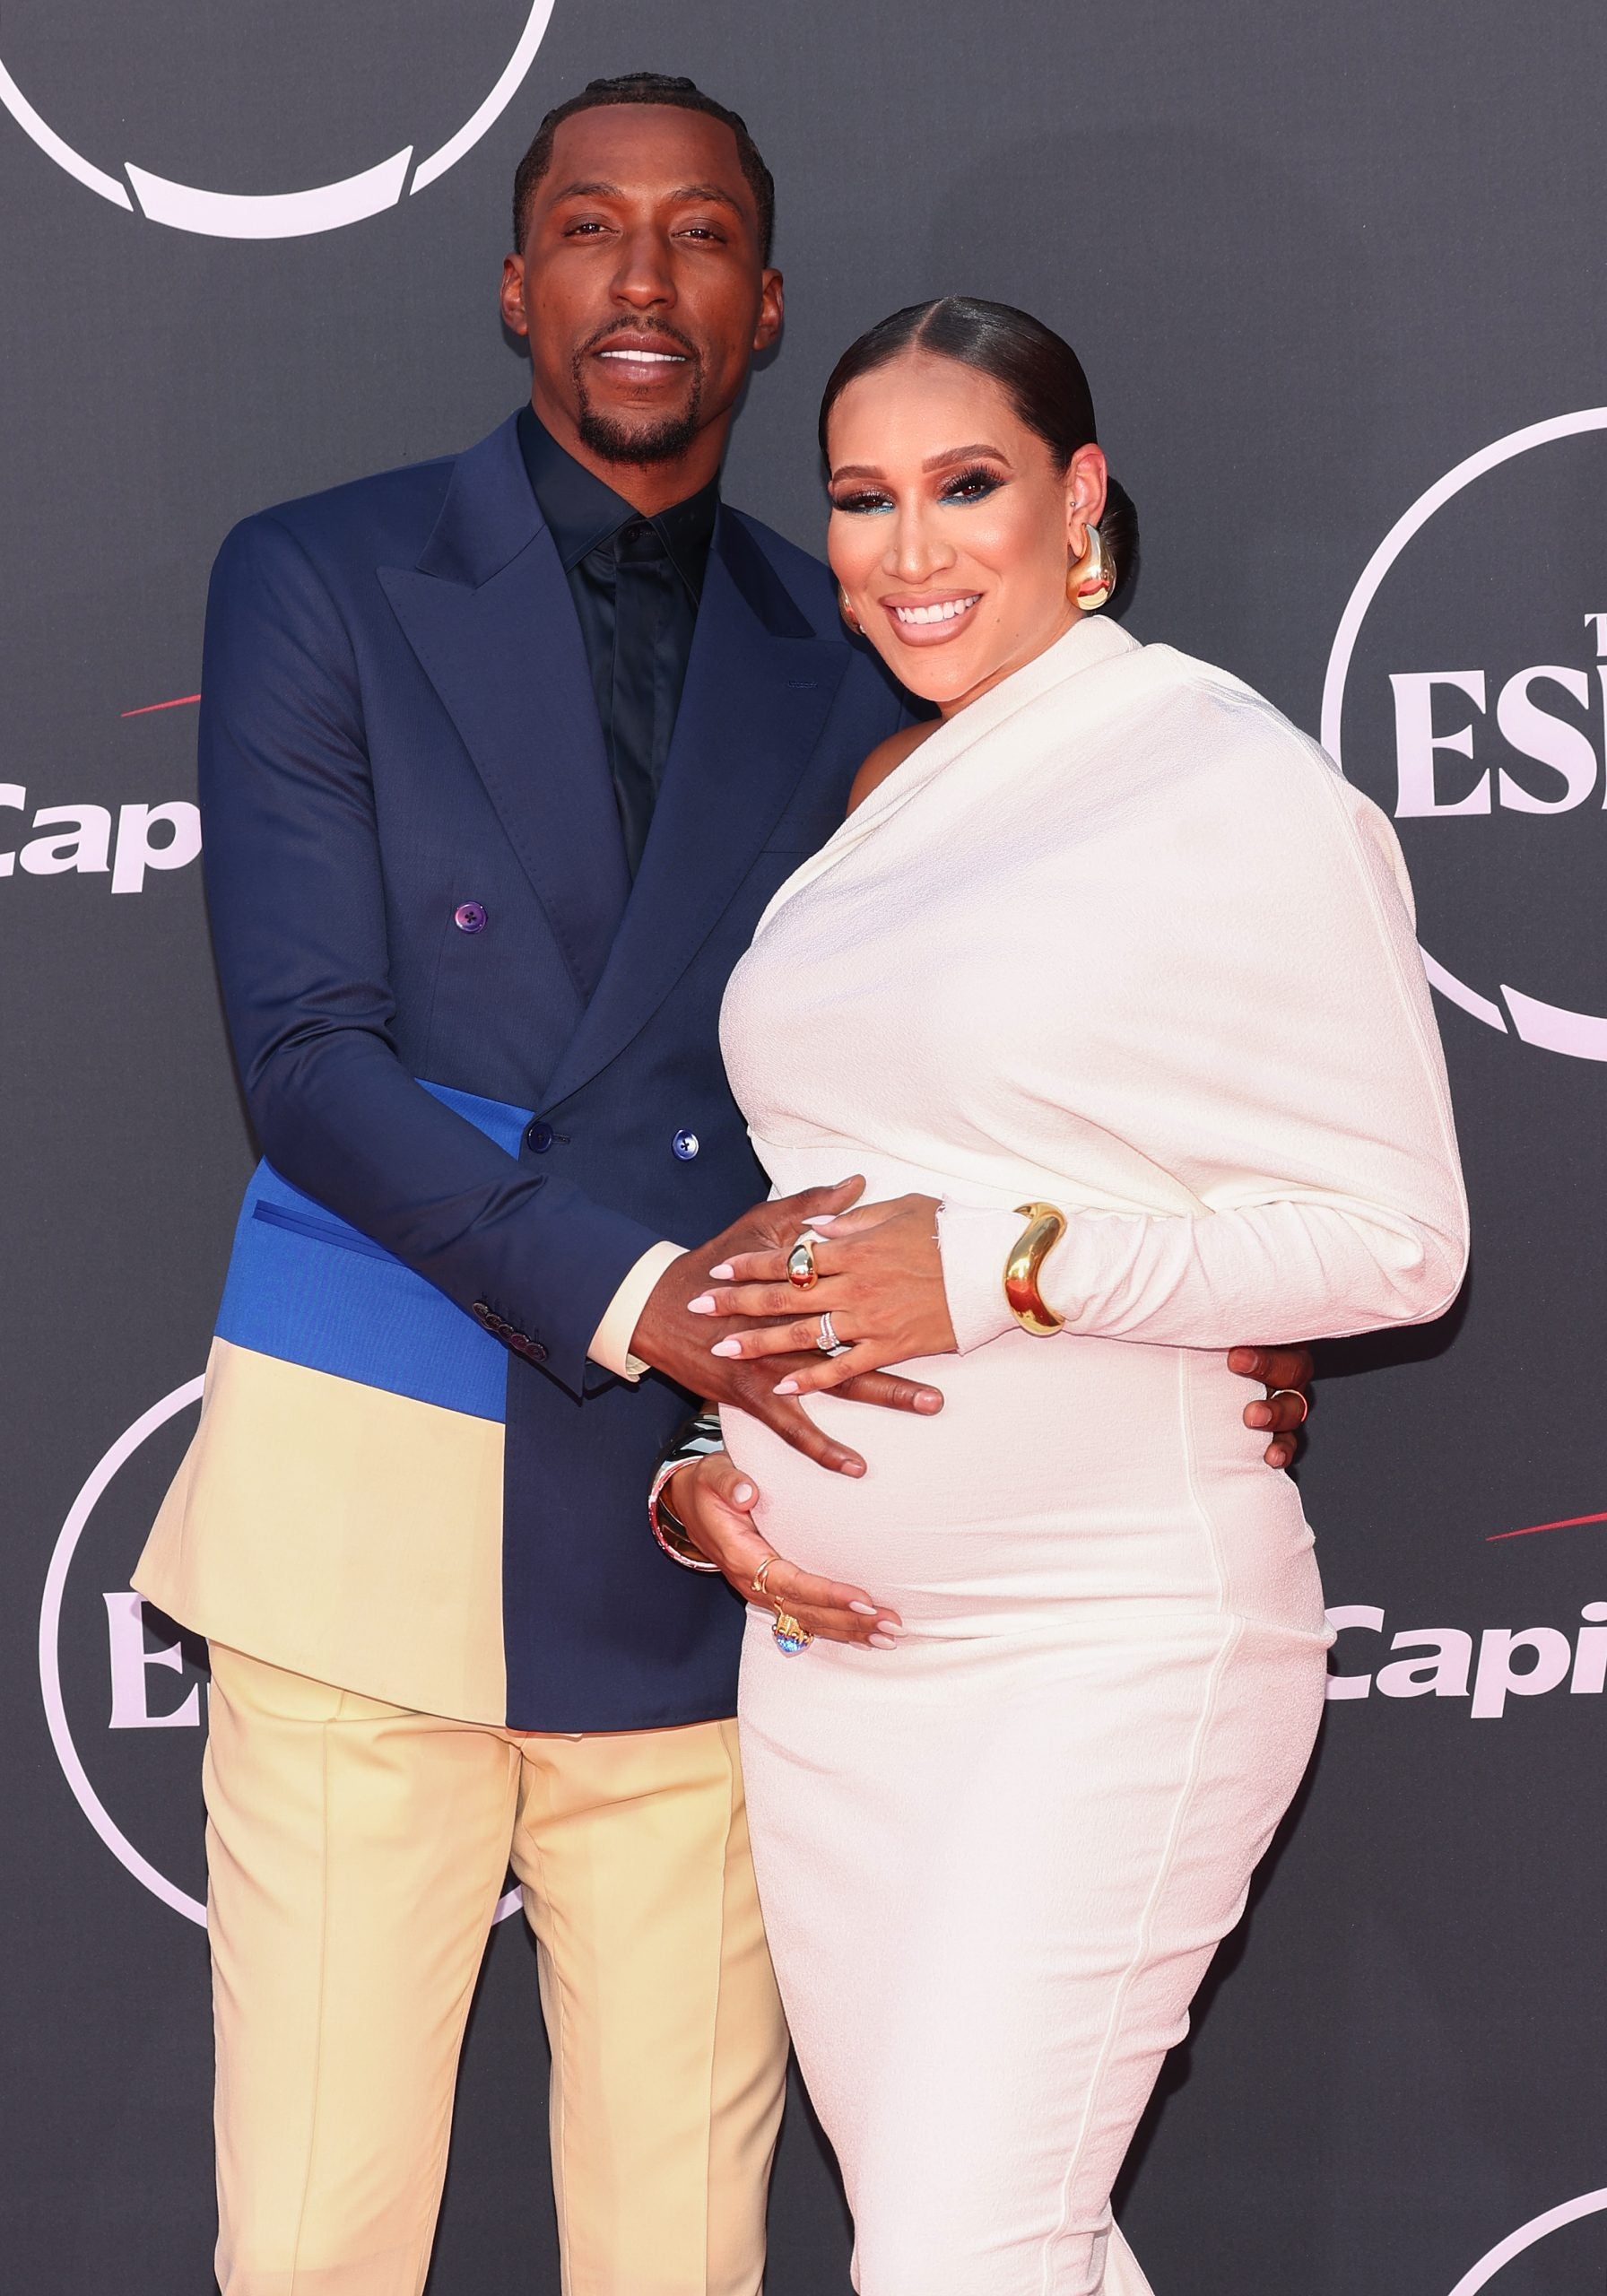 The Best Looks From The 2023 ESPYS Red Carpet